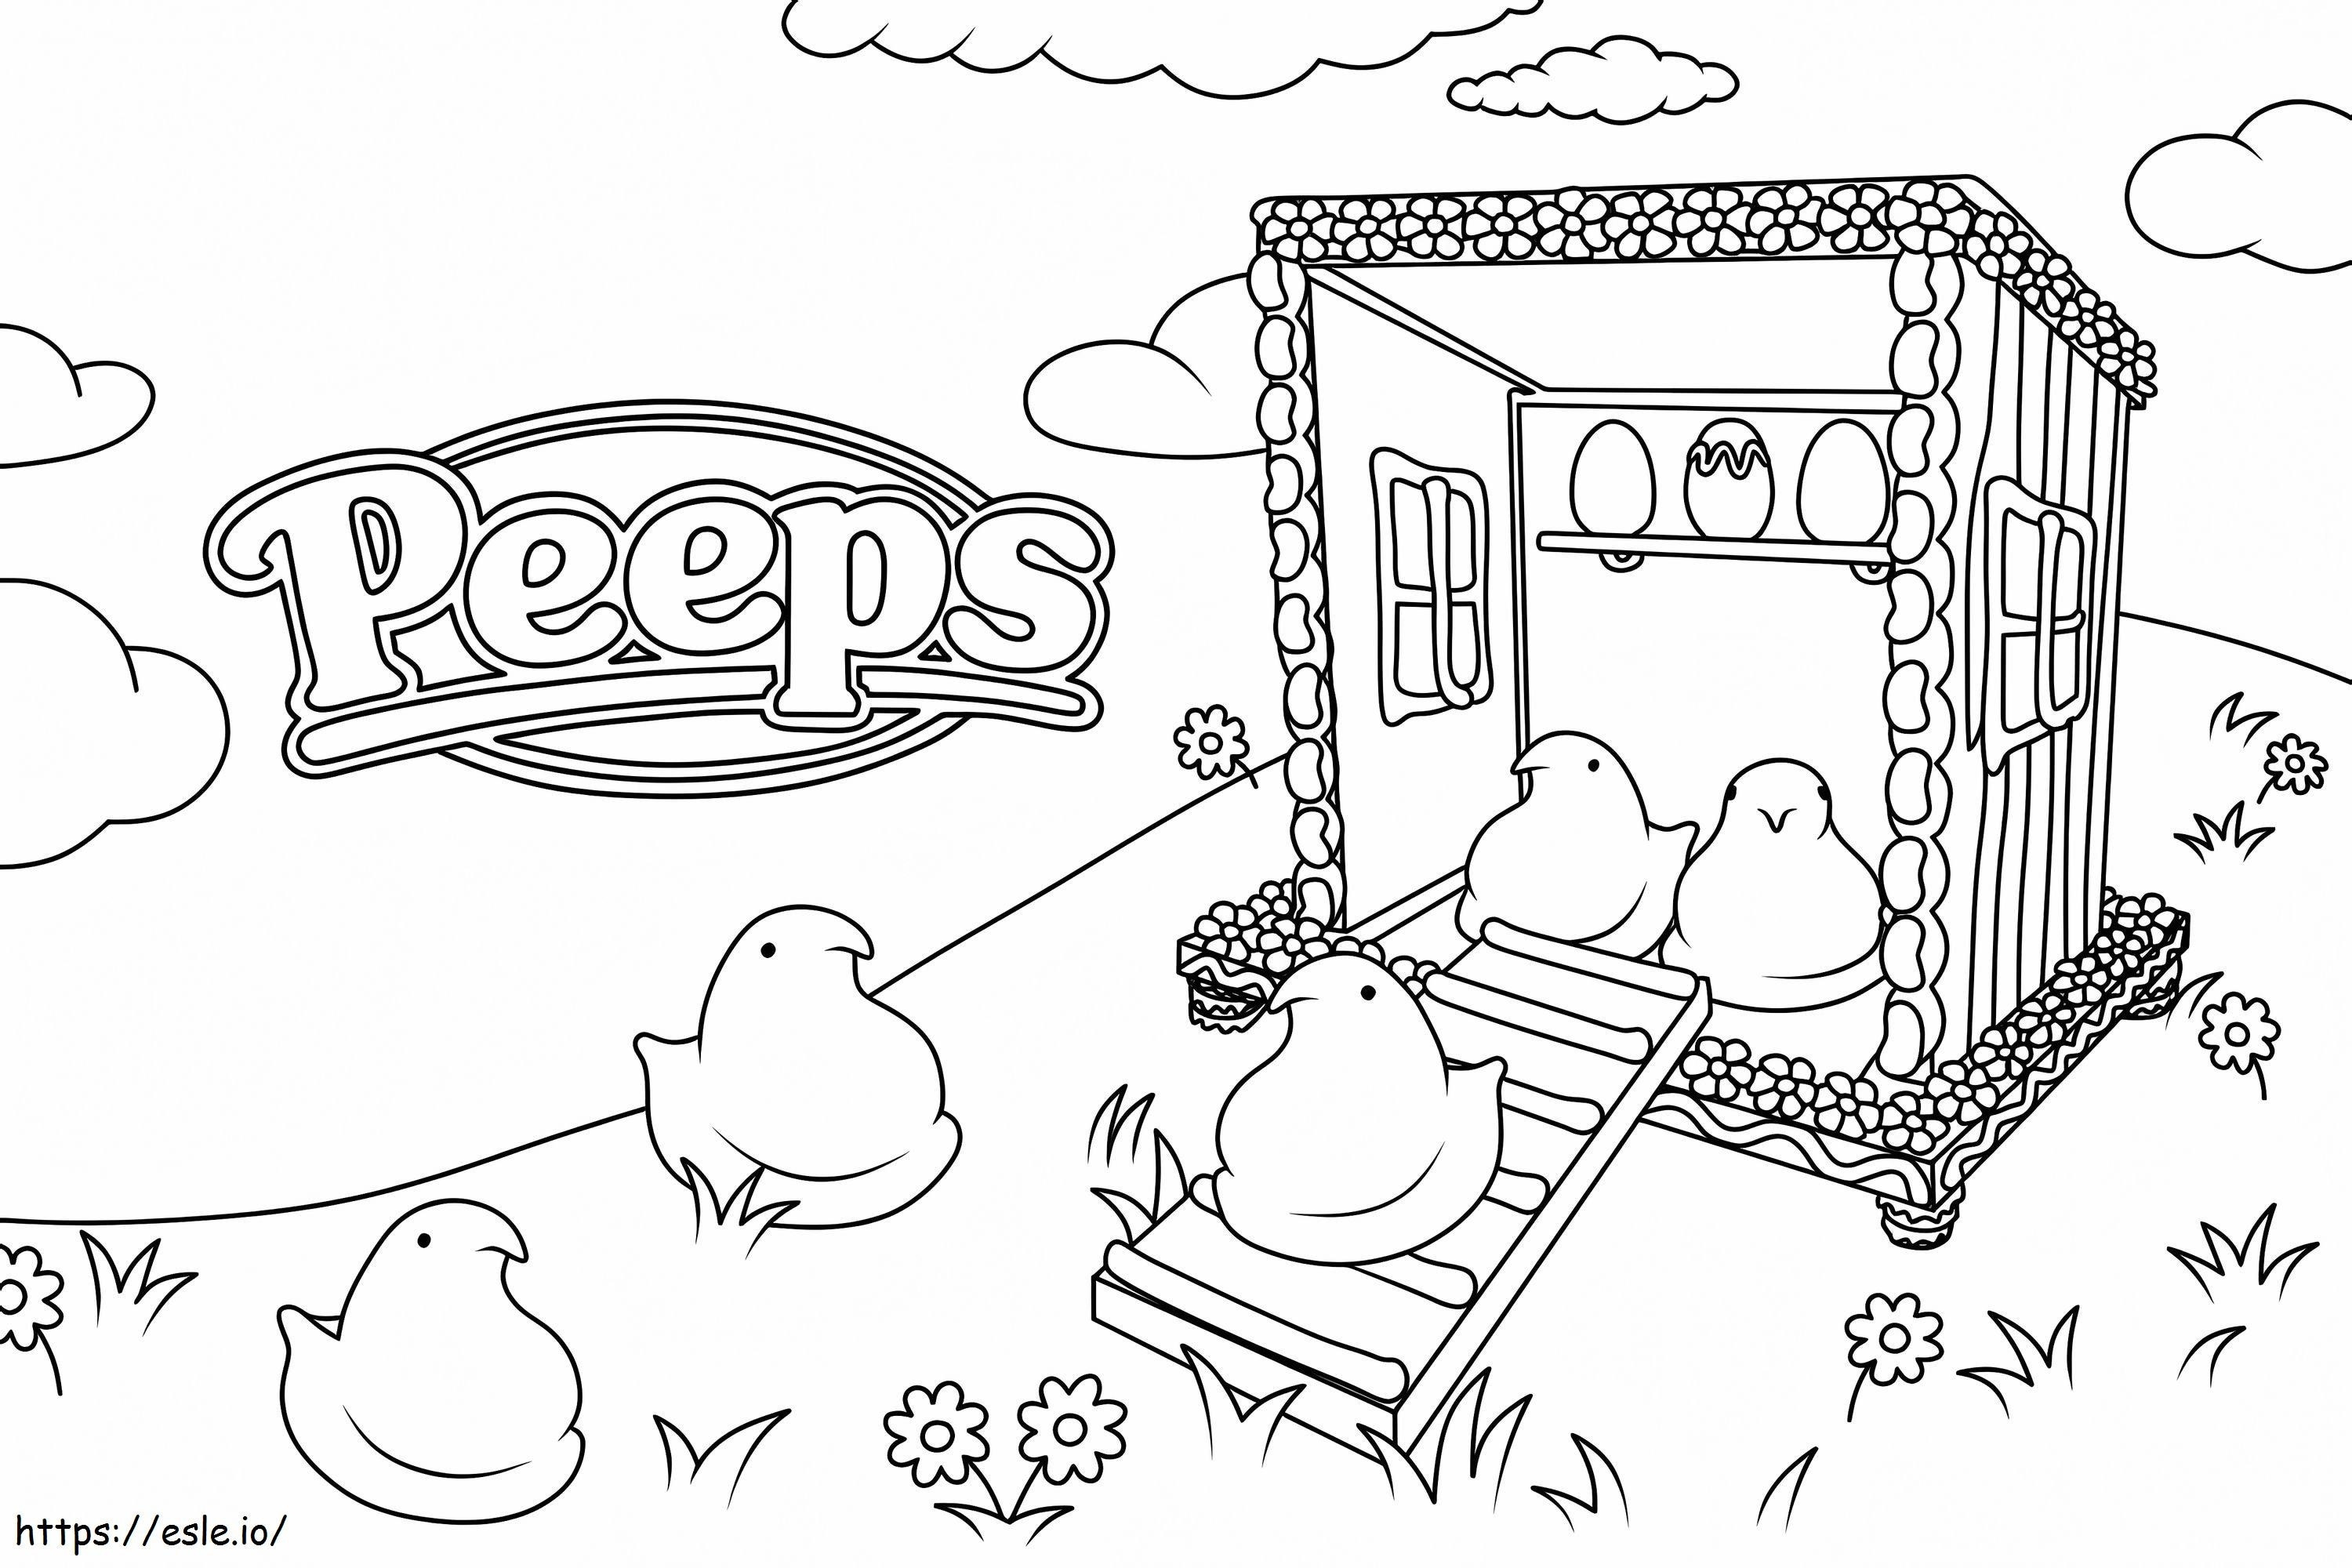 Marshmallow Peeps 6 coloring page